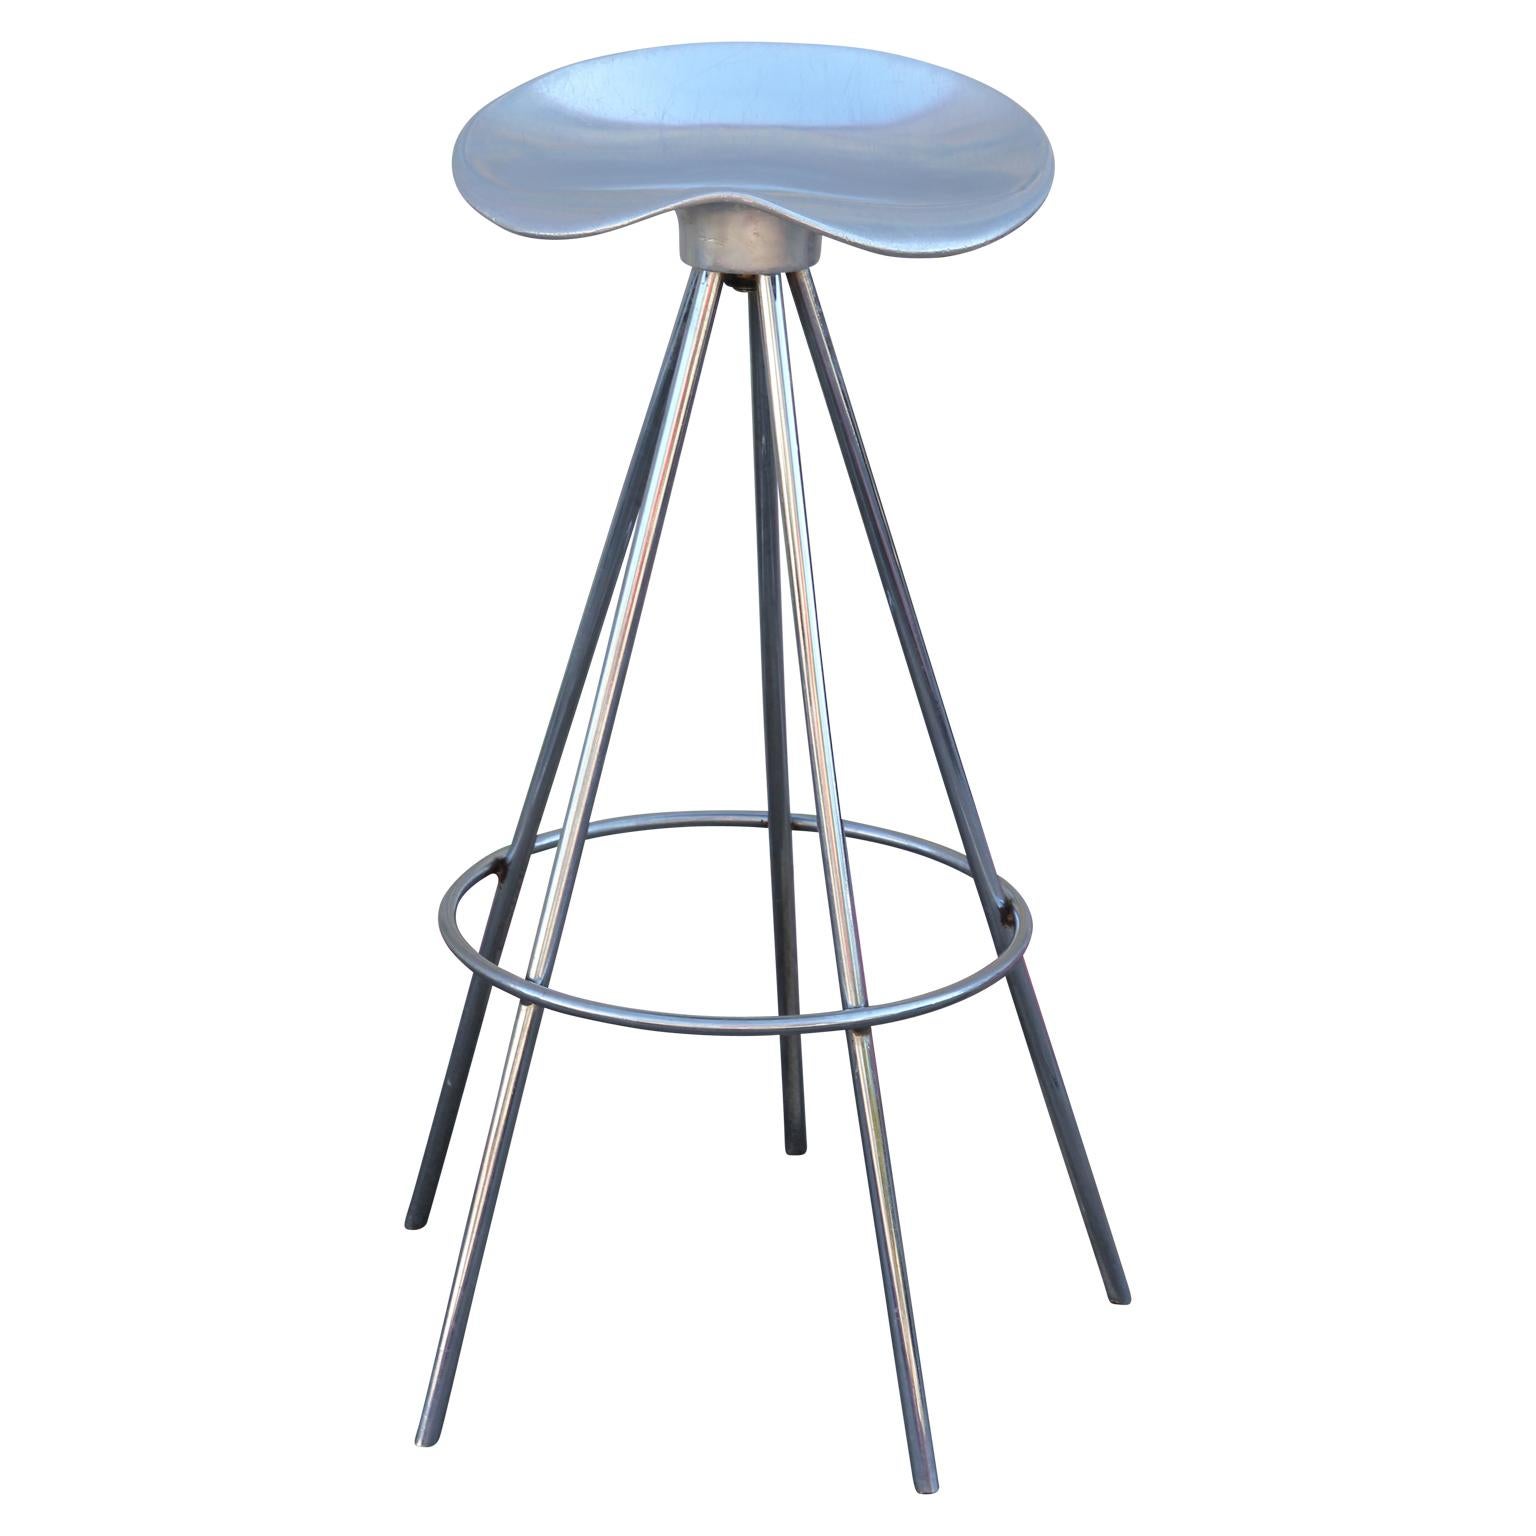 A set of 3 Jamaica chrome and aluminum bar stools by Pepe Cortes (Designer) made in Spain.

The Jamaica stool is already a Classic in Spanish design and is one of the best designed stools in all history. It’s been on the market for over 25 years and